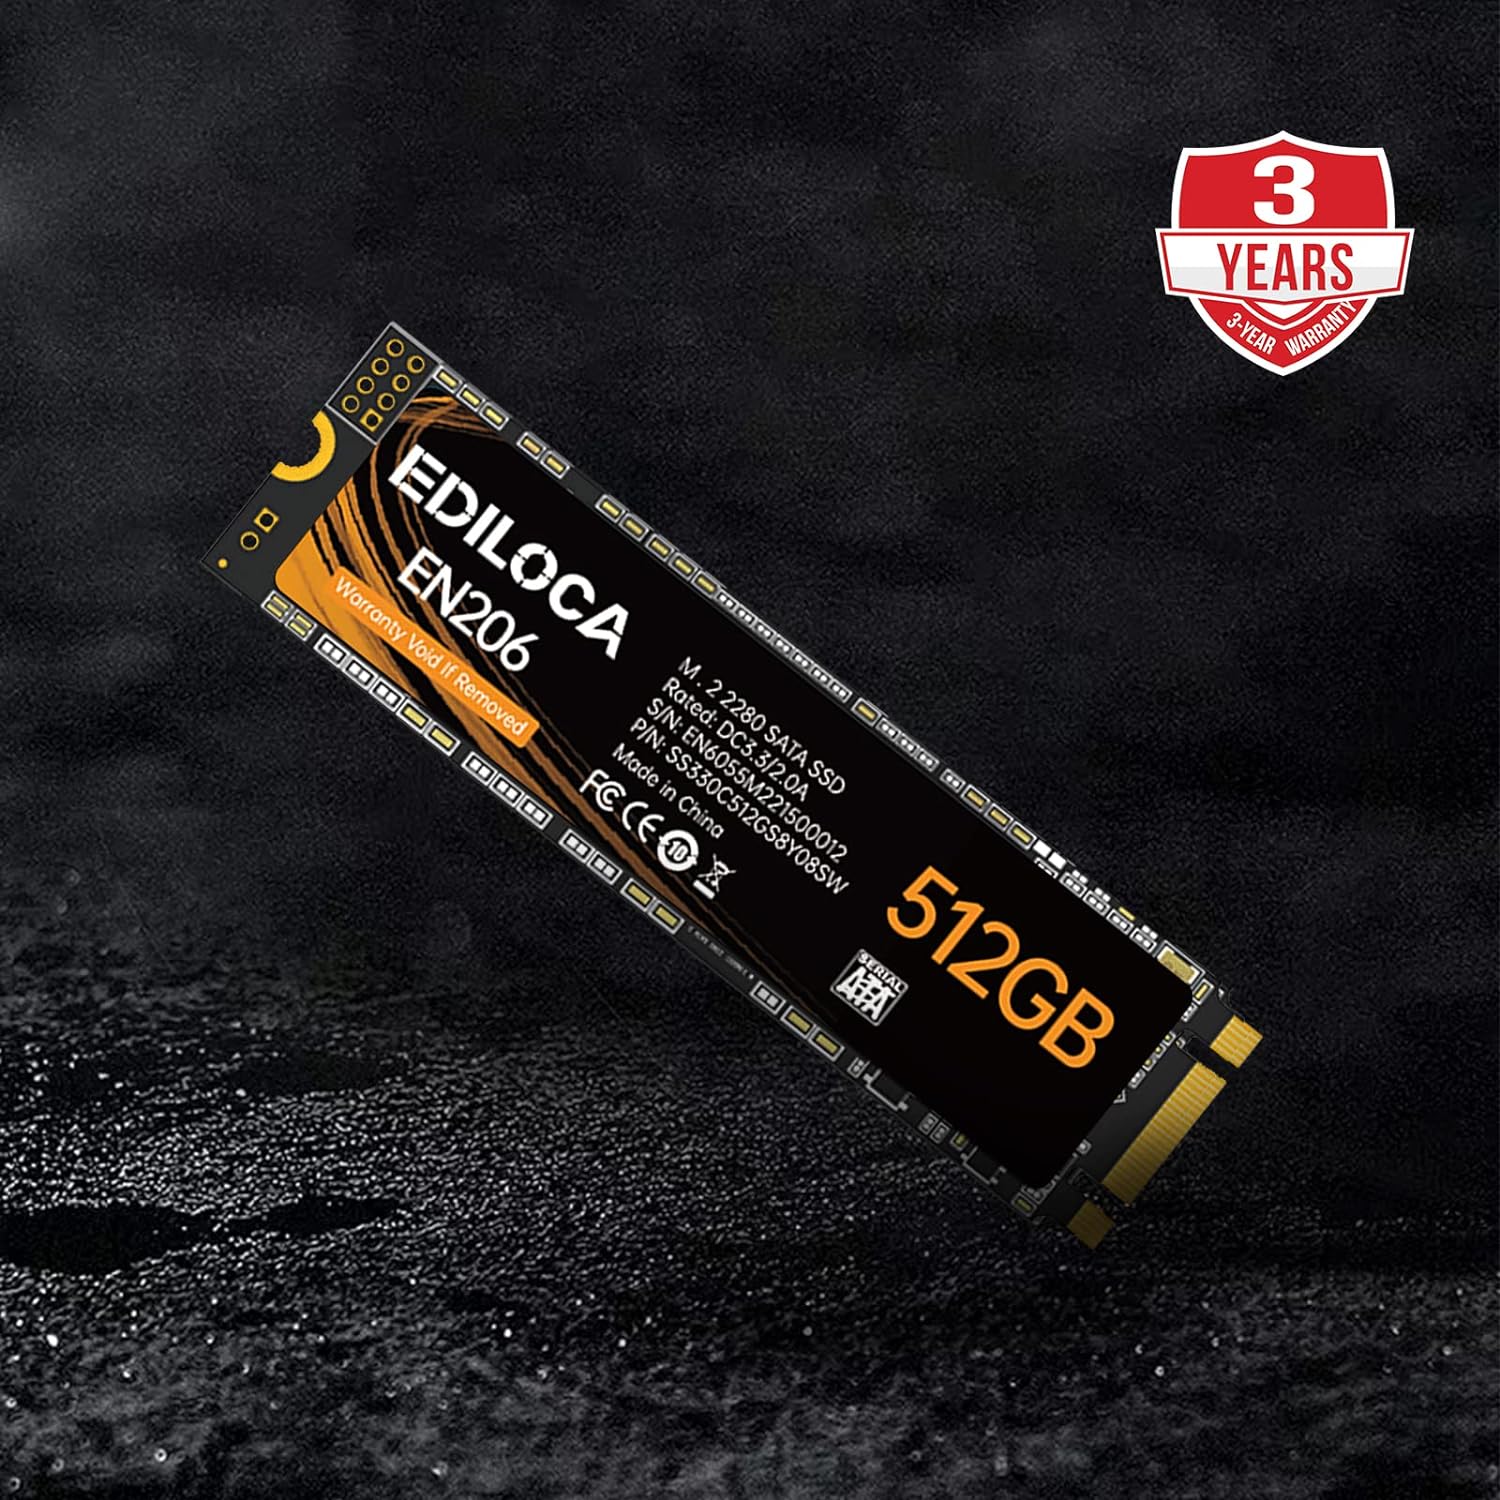 Ediloca EN206 1TB 3D NAND TLC M.2 SSD, M.2 2280 SATA III 6Gb/s SSD Internal Hard Drive, Read/Write Speed up to 550/480 MB/s, Compatible with Ultrabooks, Tablet Computers and Mini PCs